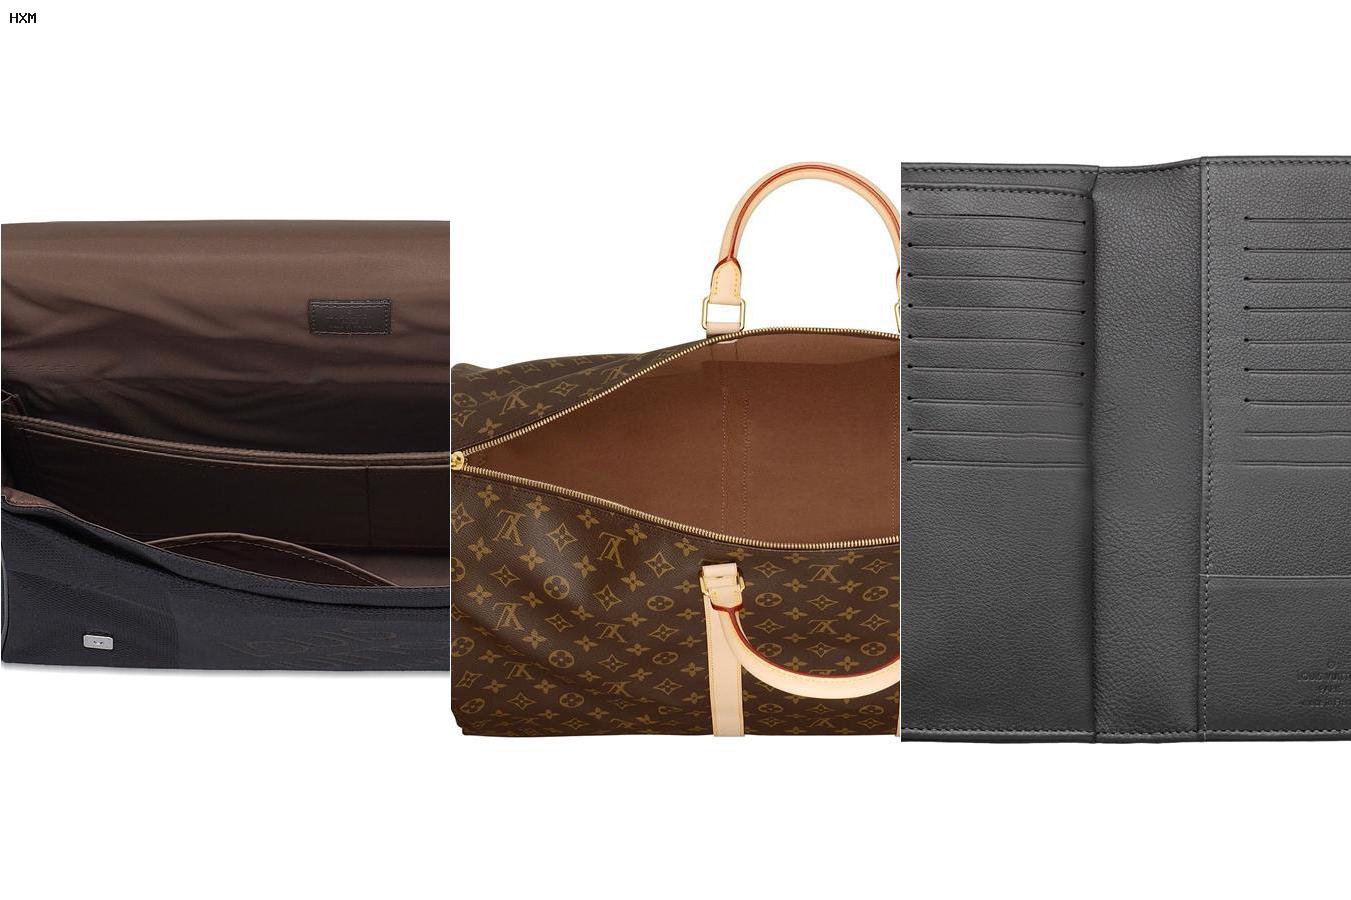 Louis Vuitton Is Selling “Airplane Bags” For Rs 29 Lakhs, People